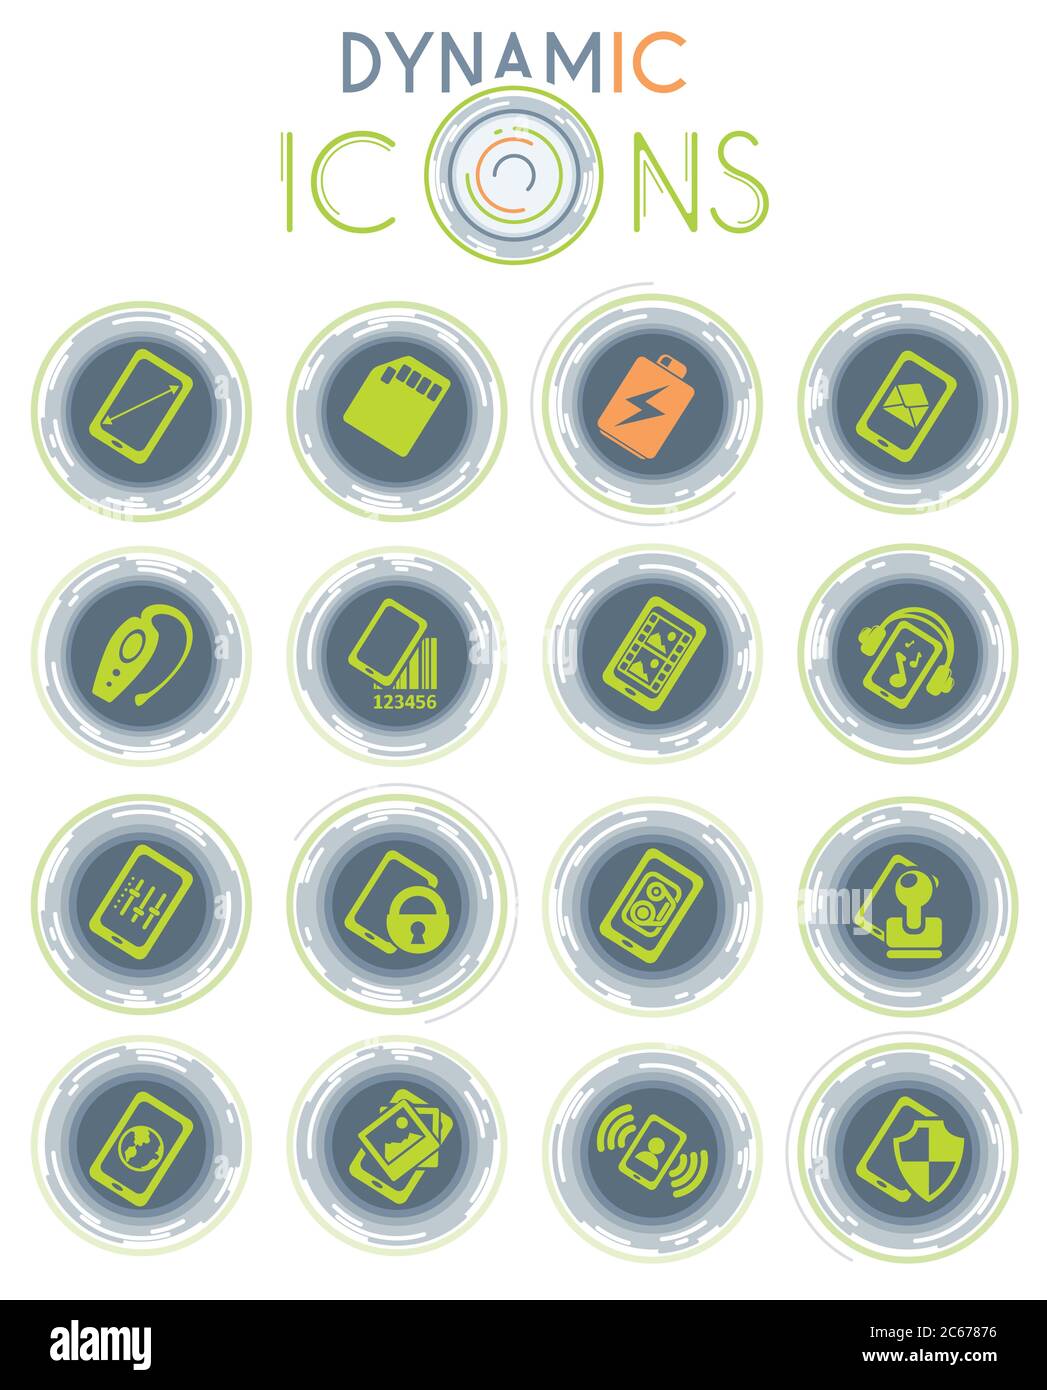 Smartphone, specifications and functions icons Stock Vector